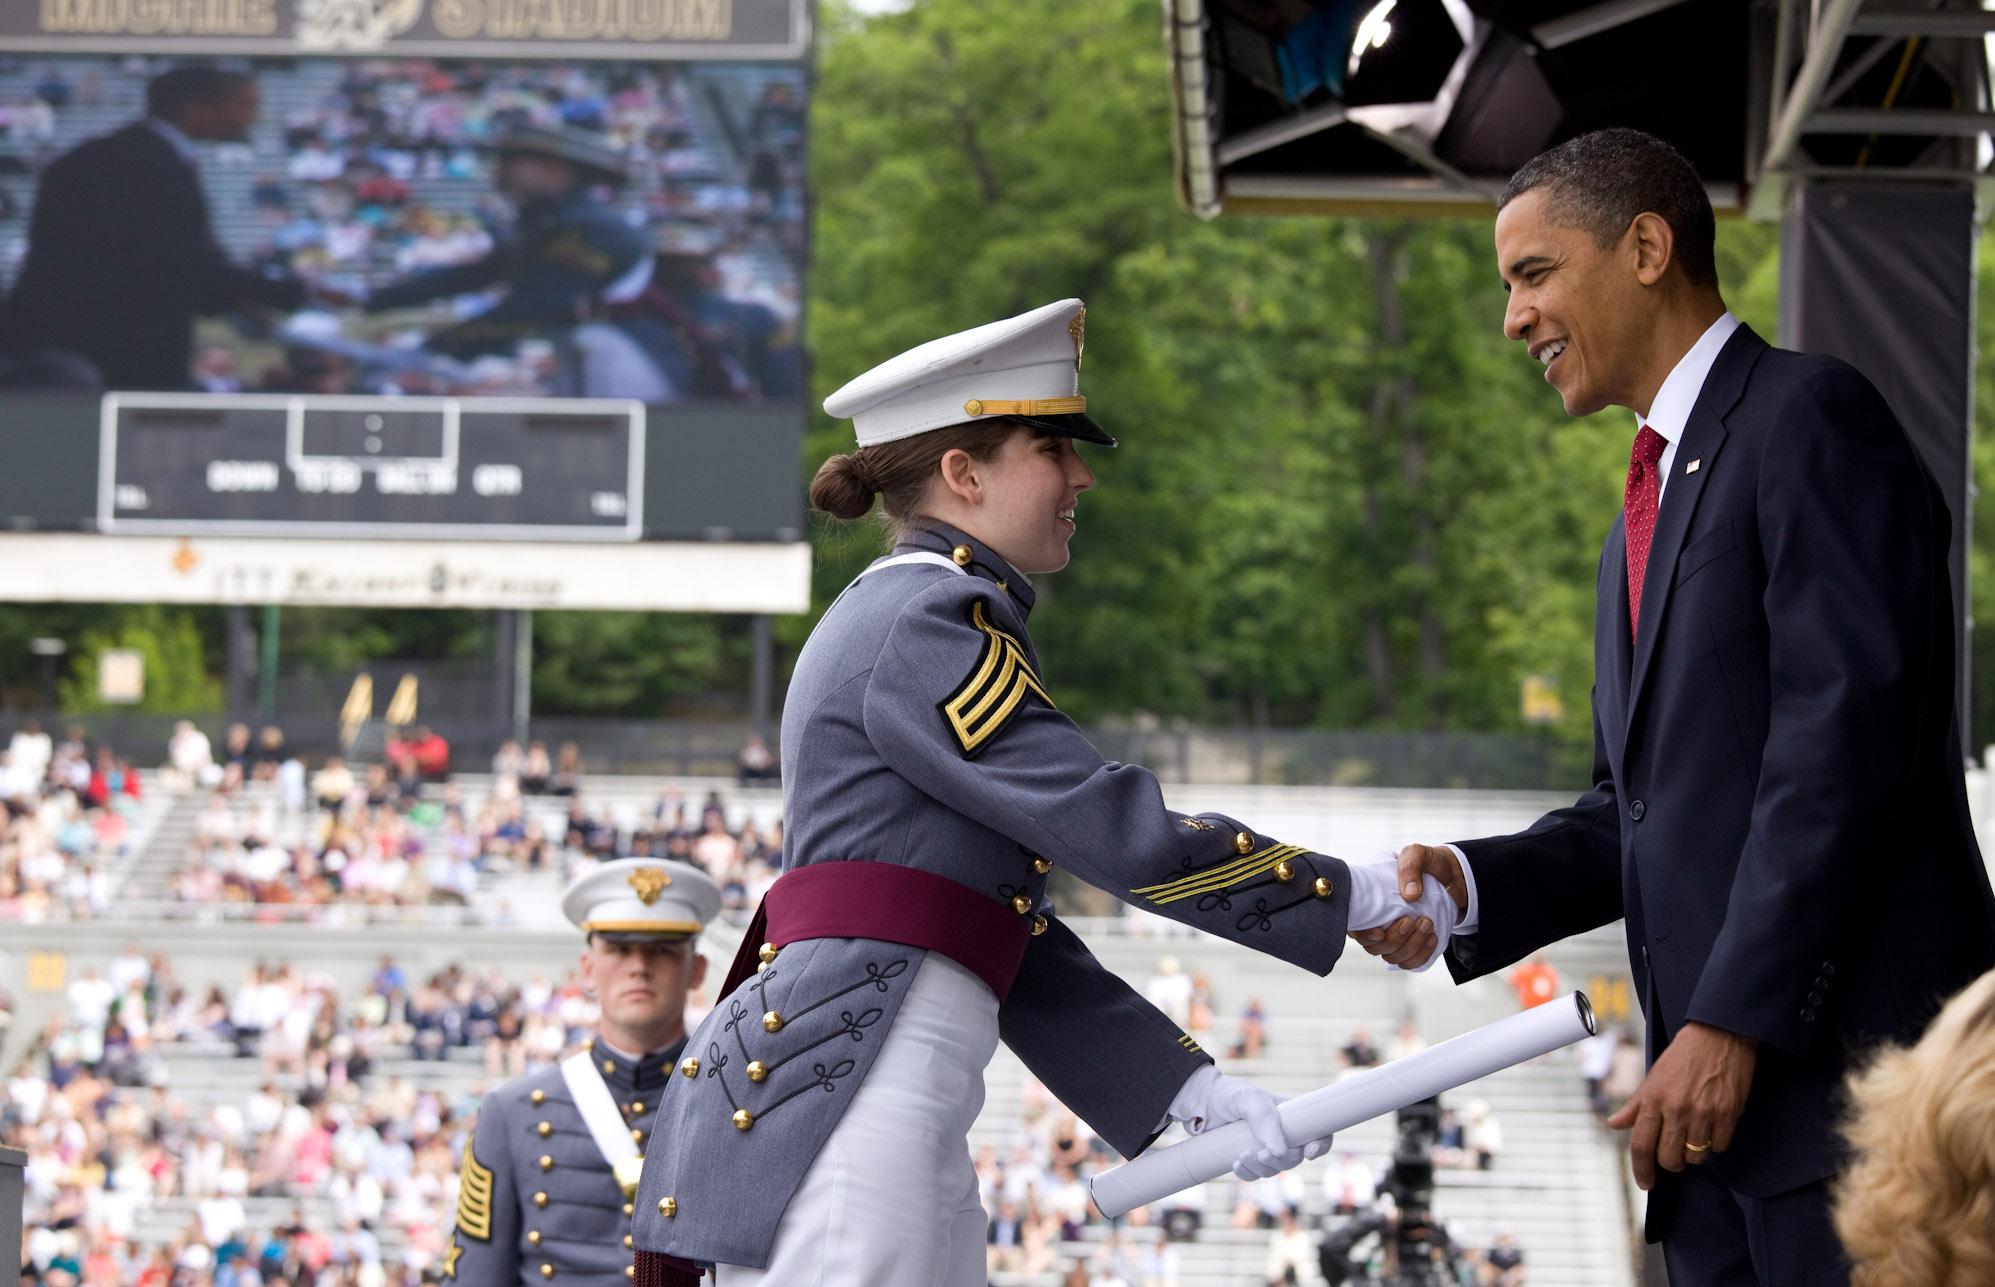 President Obama at West Point Commencement